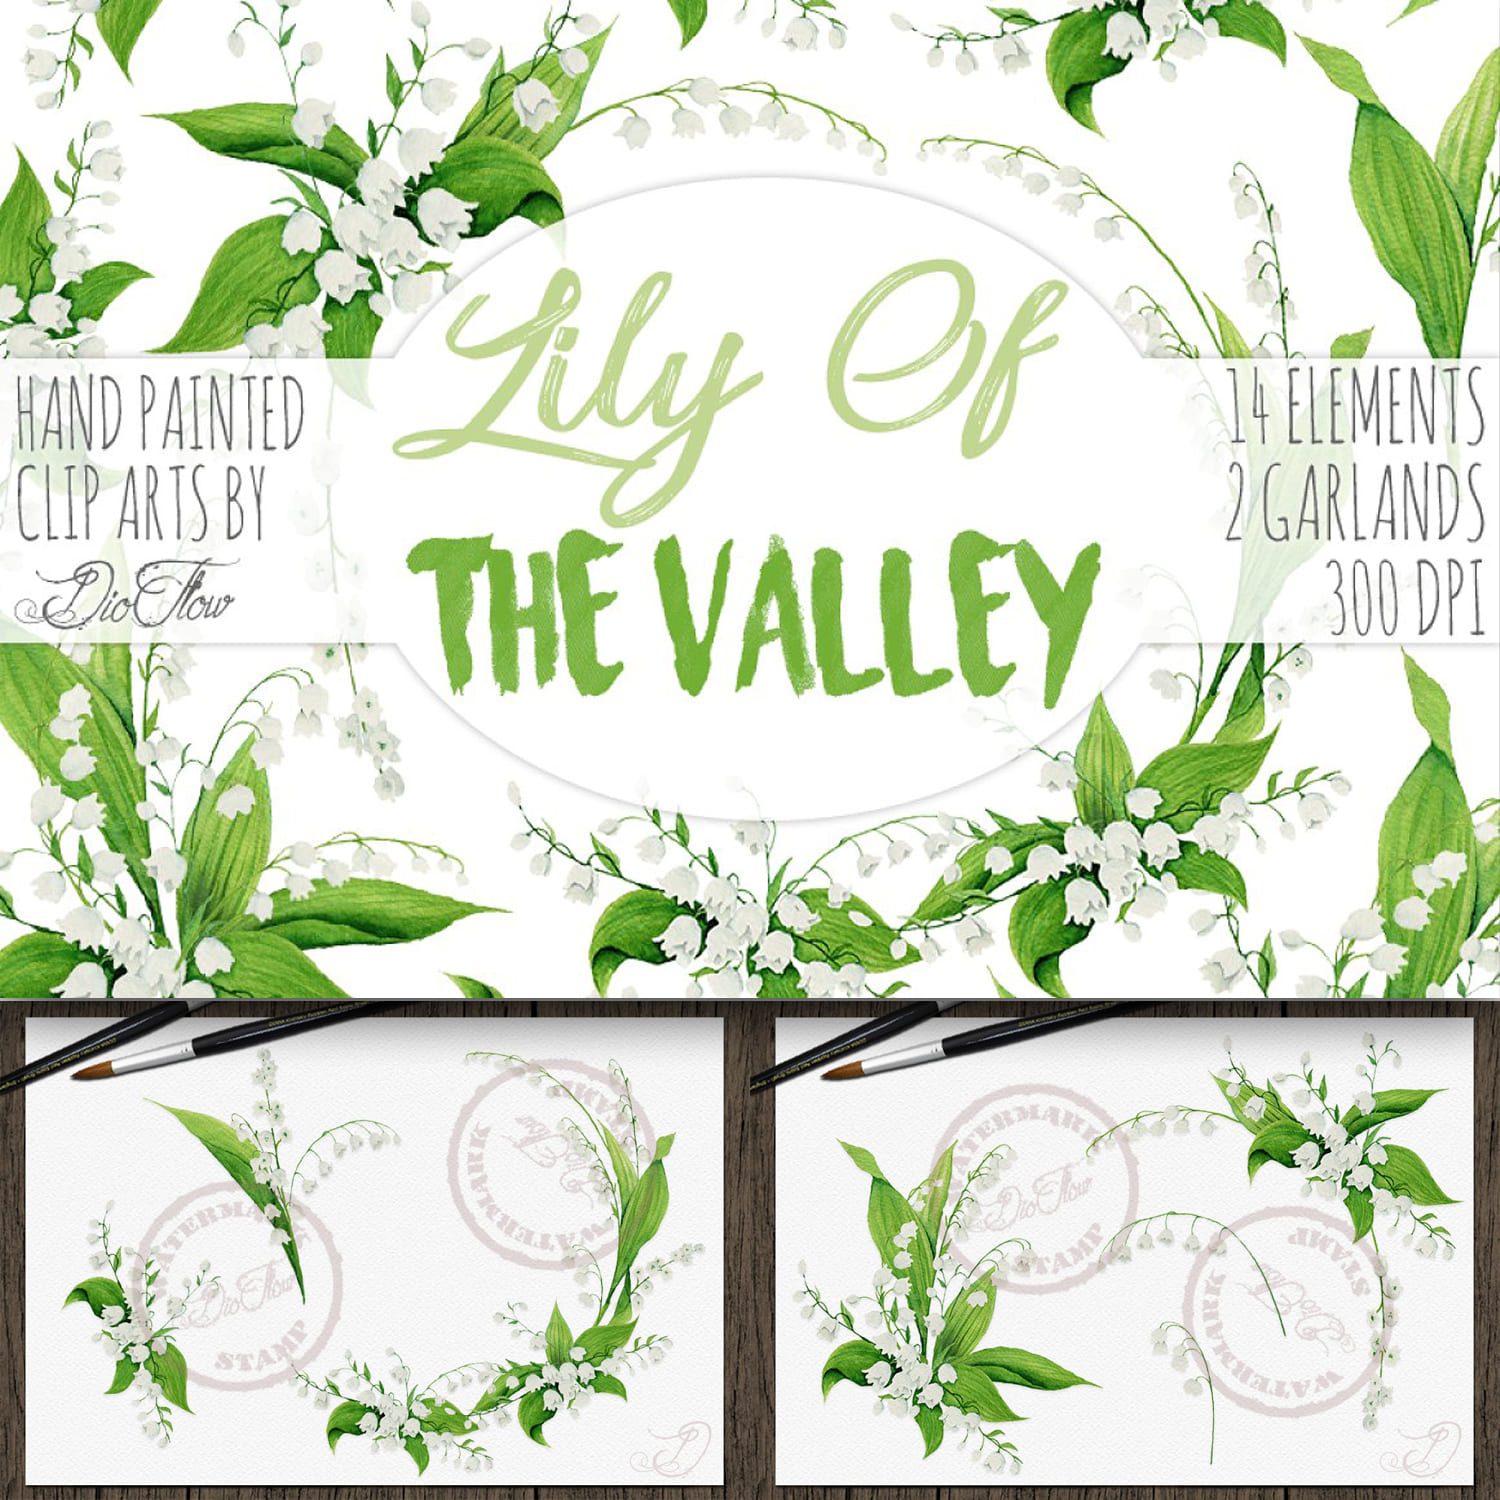 Lily Of The Valley Clip Art cover.